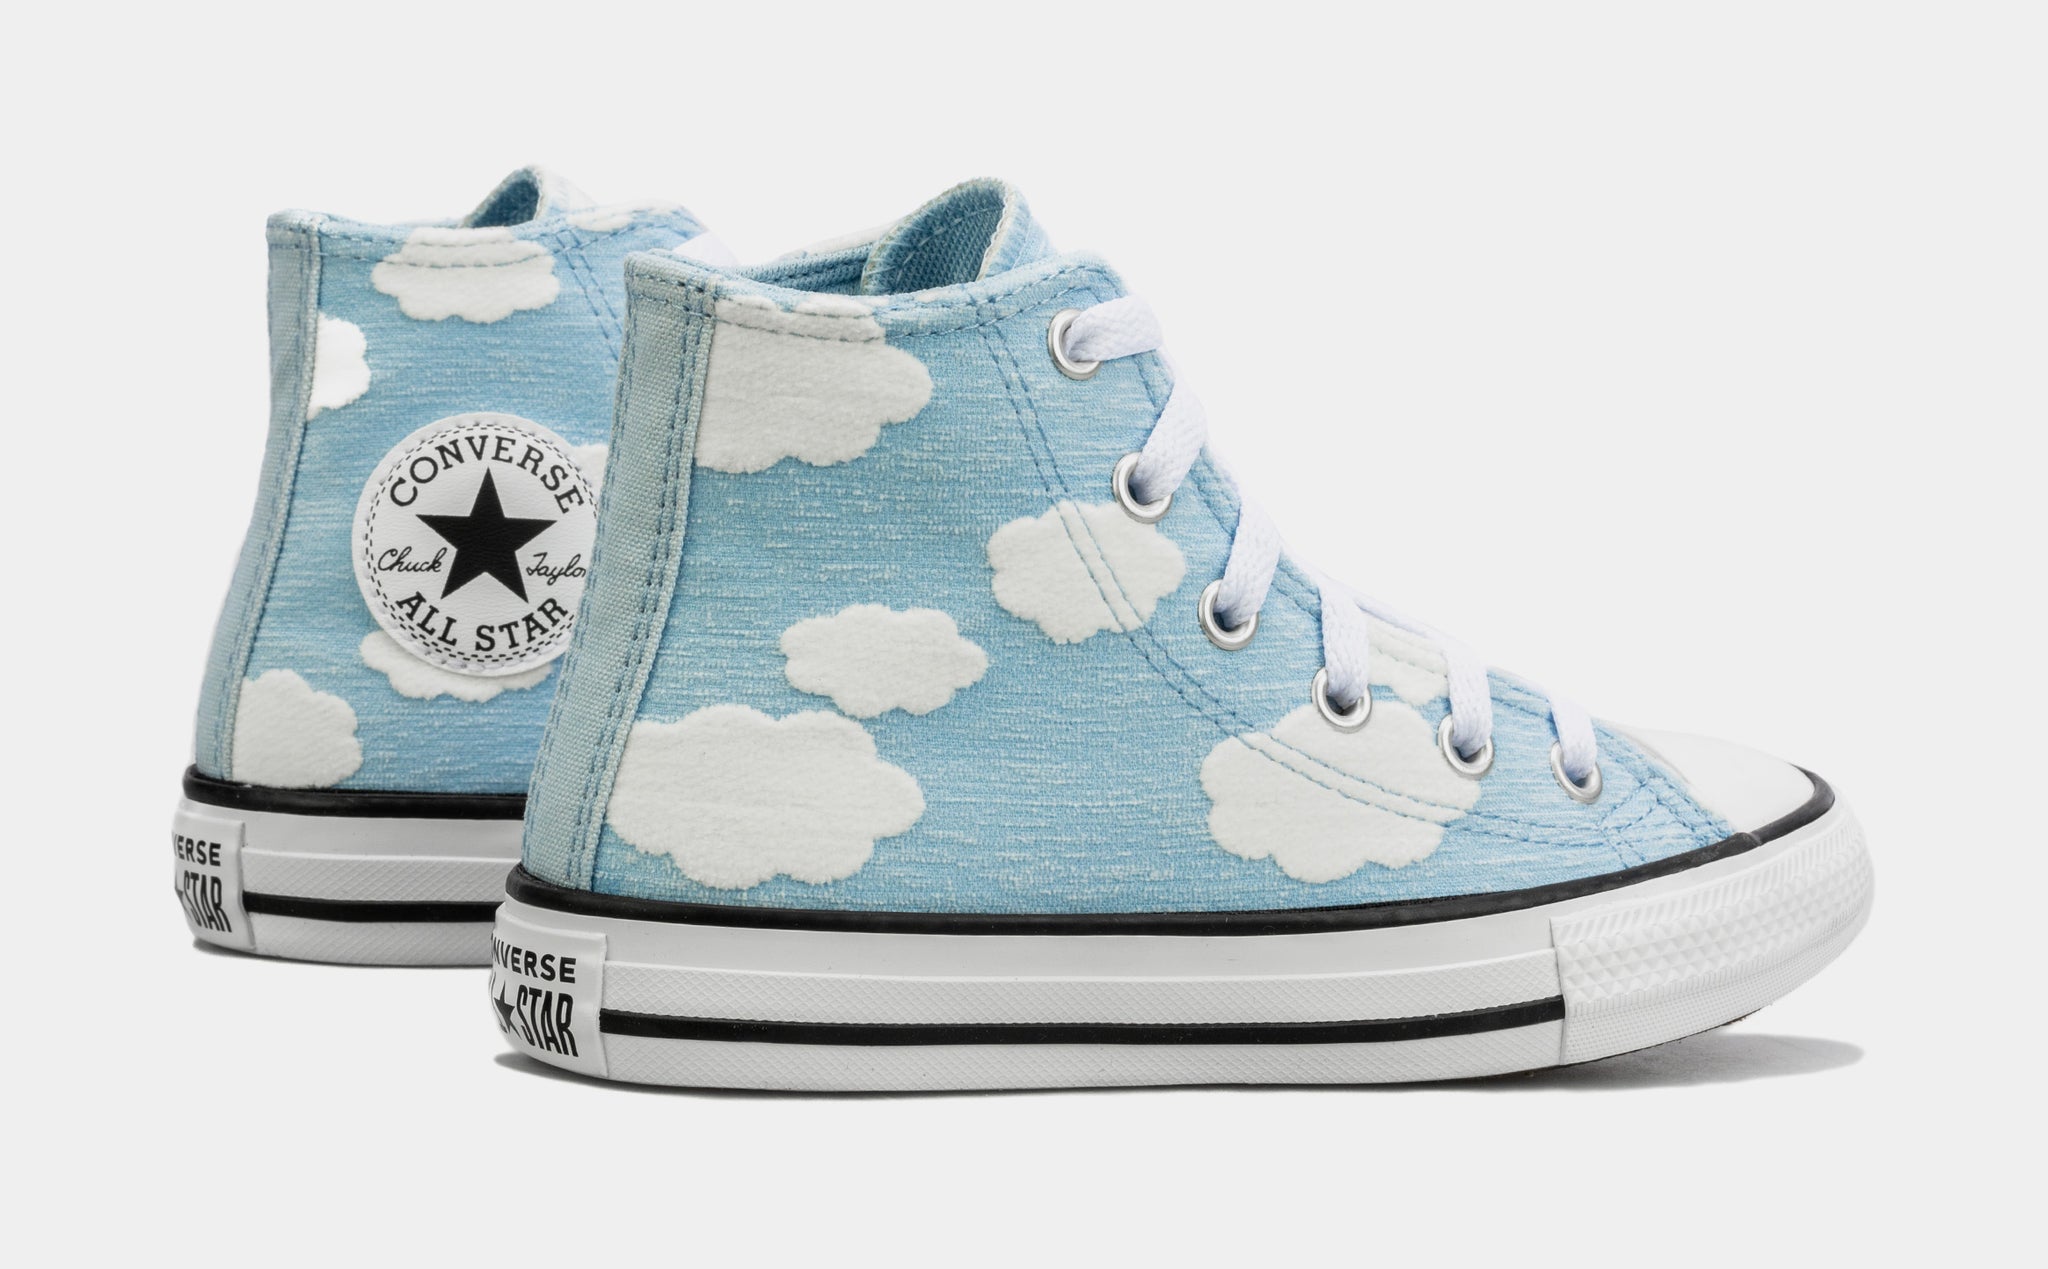 whisky delicatesse Schoolonderwijs Converse Chuck Taylor All Star Clouds Preschool Lifestyle Shoes Blue  A04342F – Shoe Palace